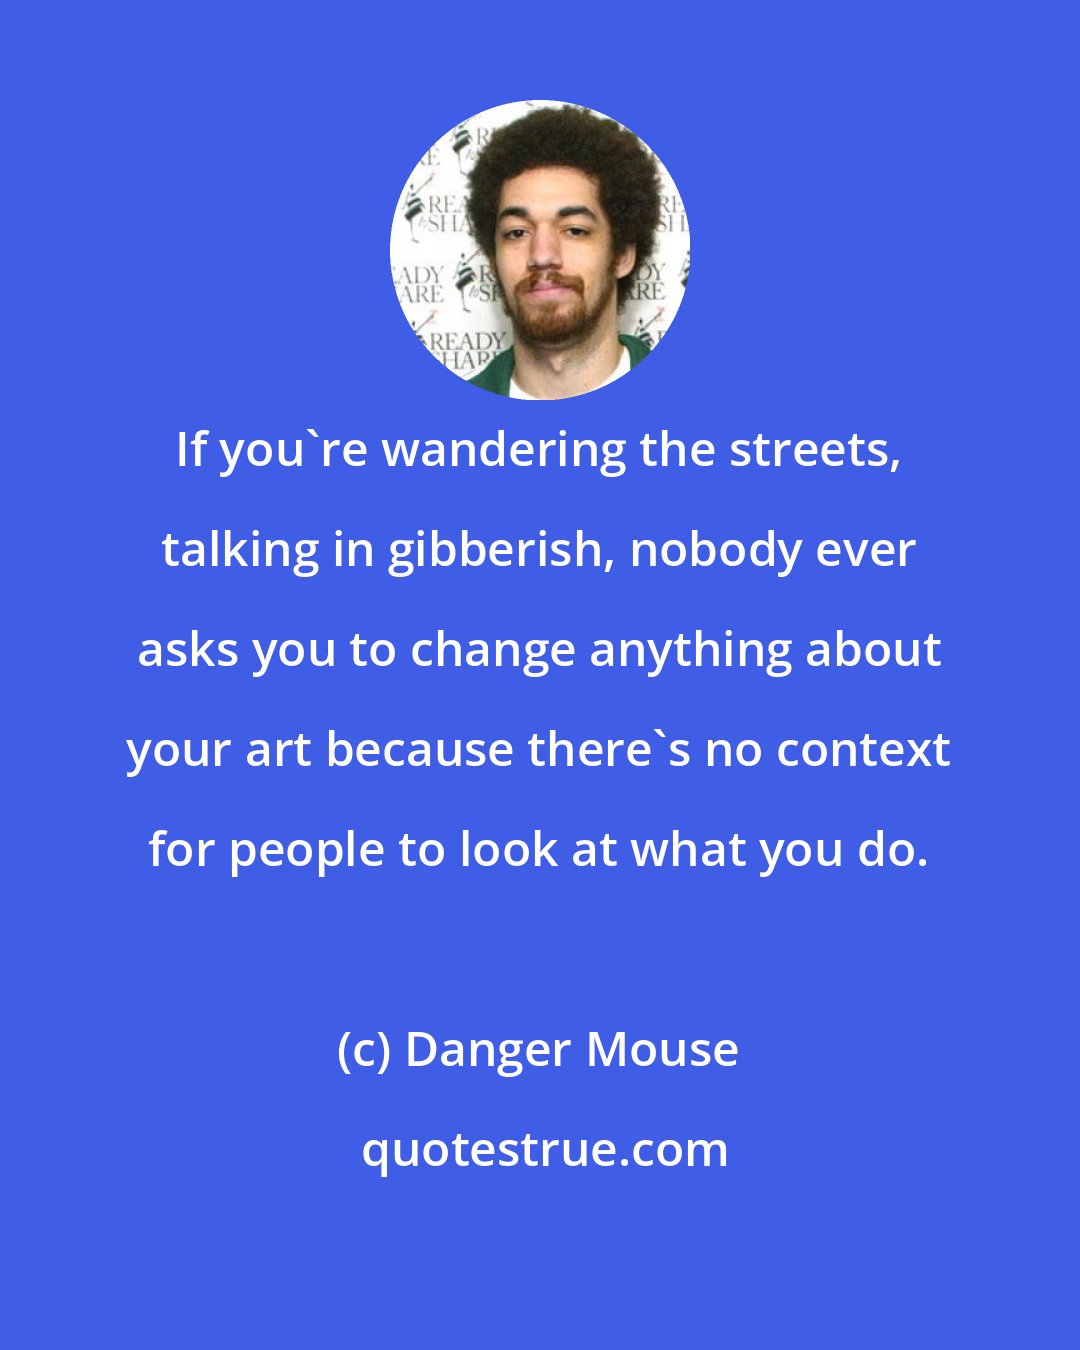 Danger Mouse: If you're wandering the streets, talking in gibberish, nobody ever asks you to change anything about your art because there's no context for people to look at what you do.